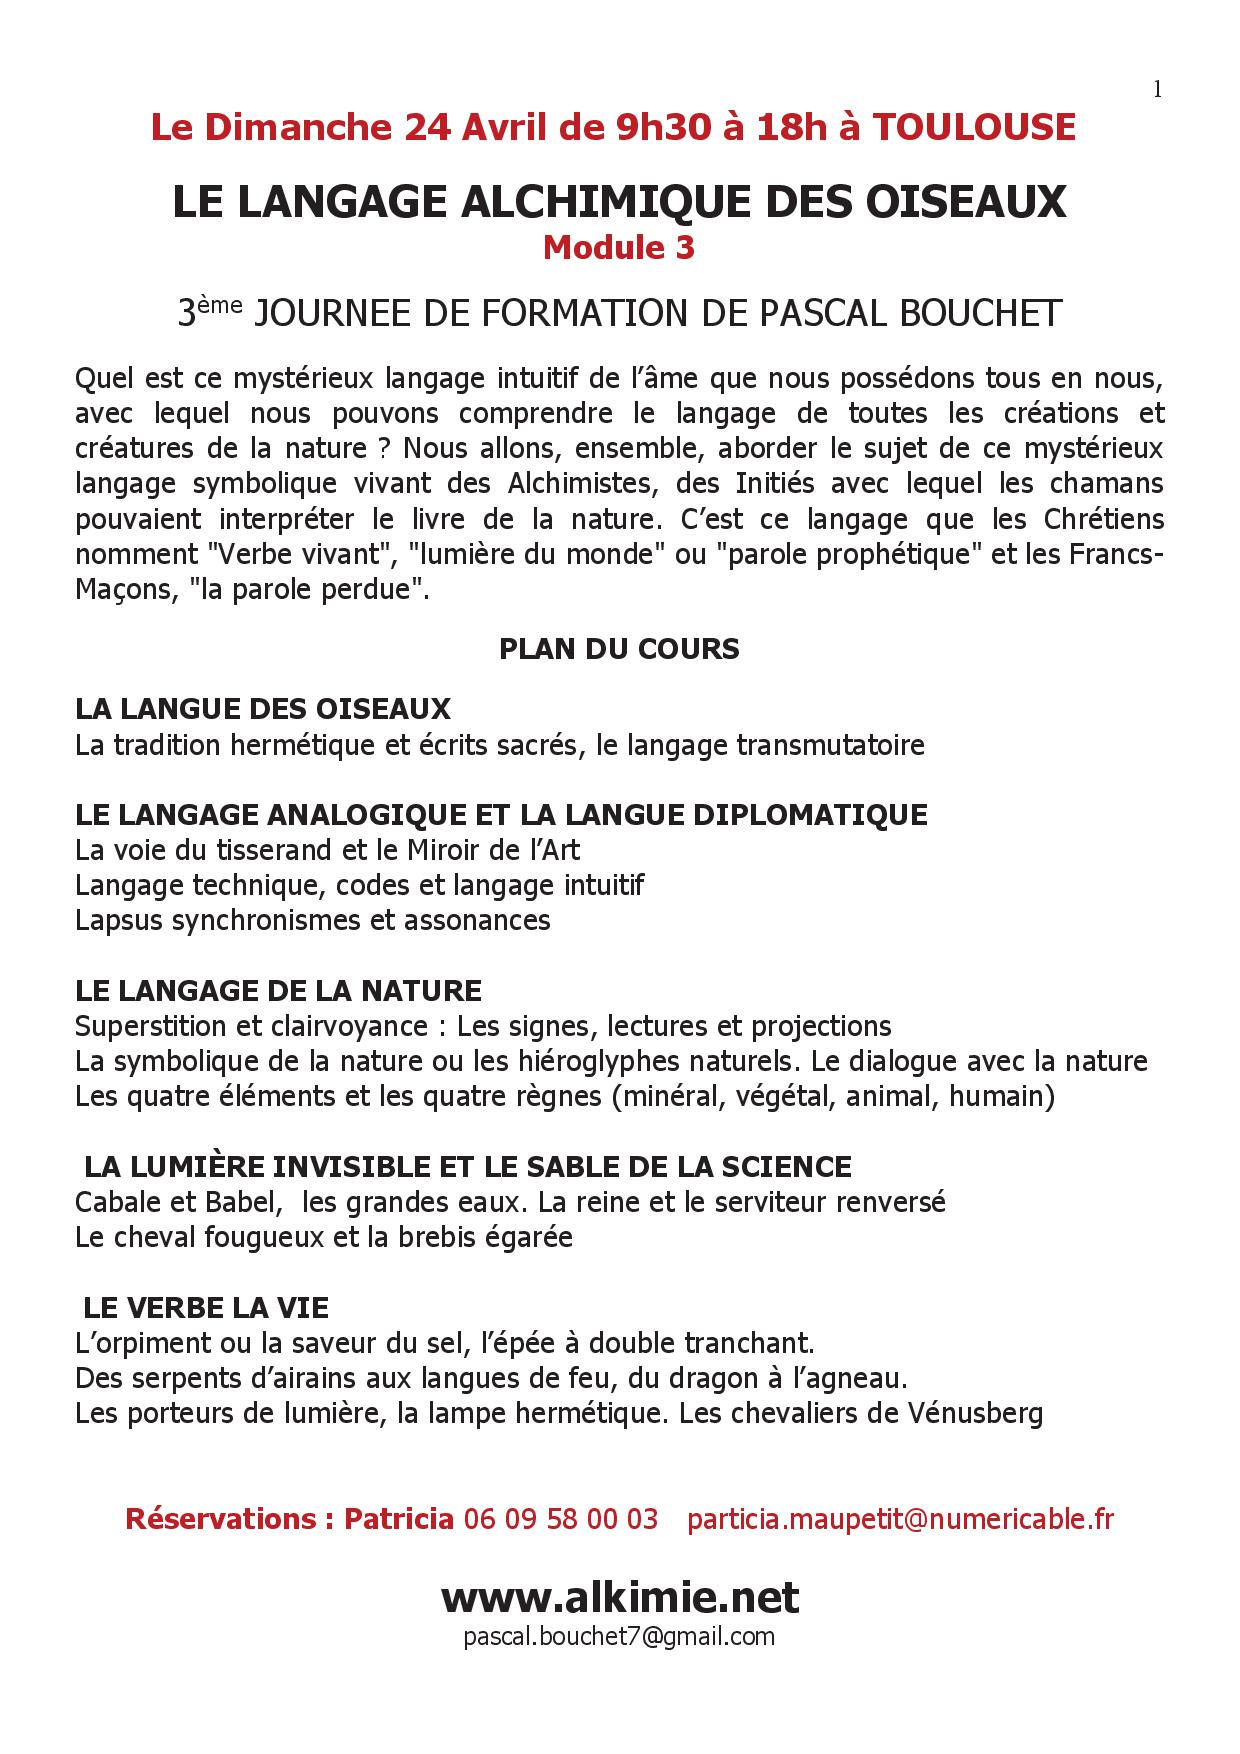 Plan cours avi 3 toulouse avril 2017